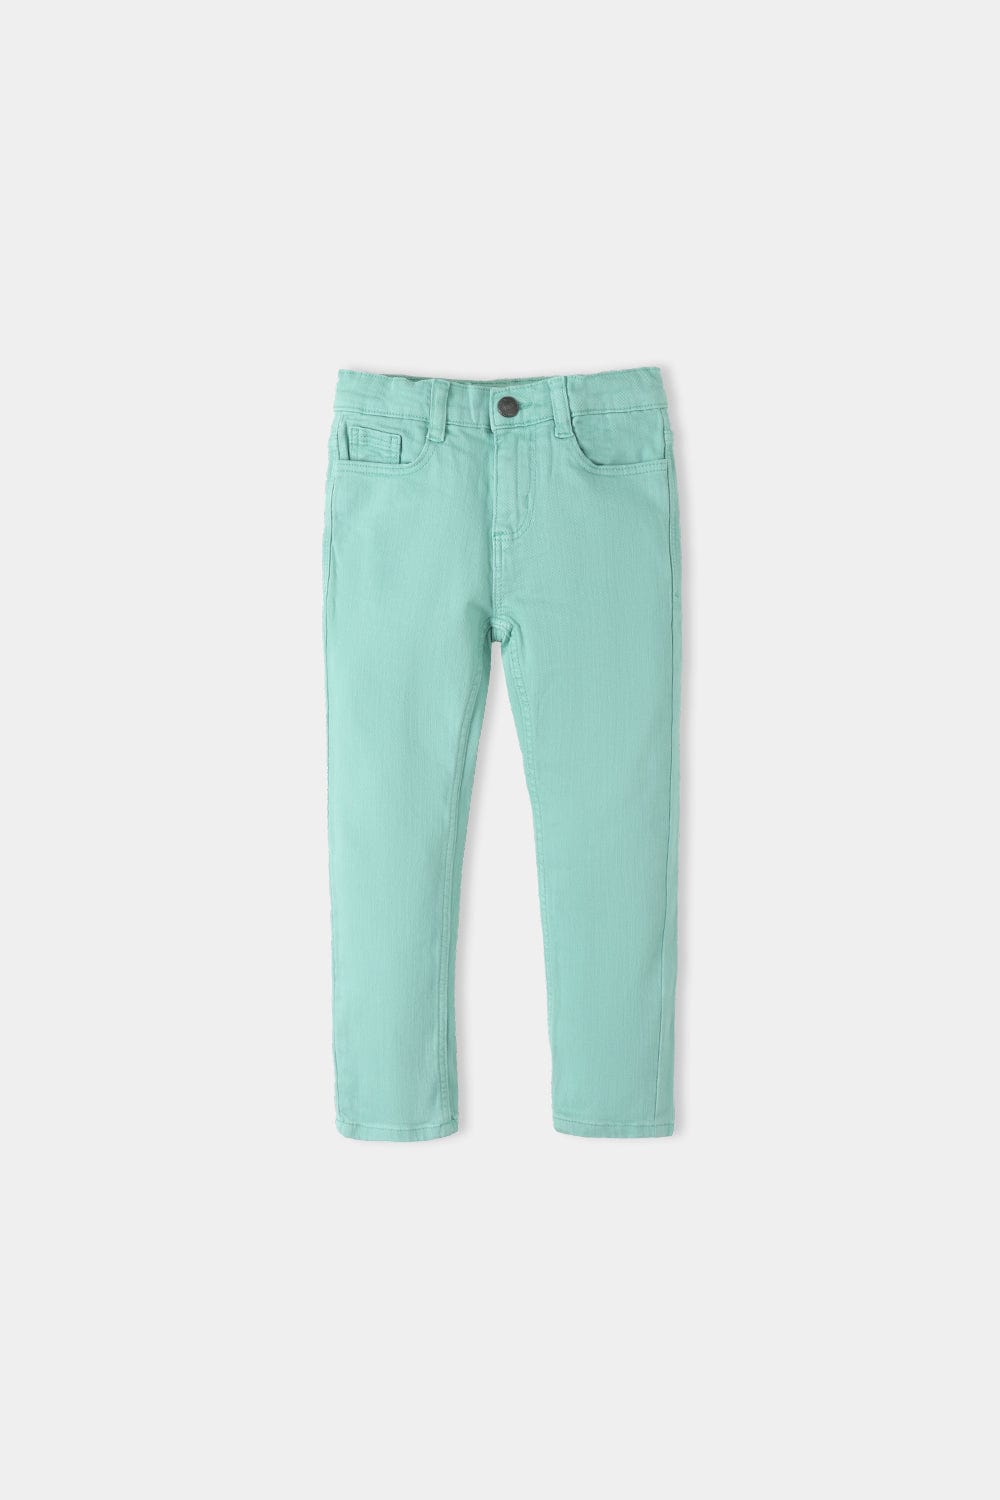 Hope Not Out by Shahid Afridi Boys Non Denim Pants Boys Light Green Cotton Pents